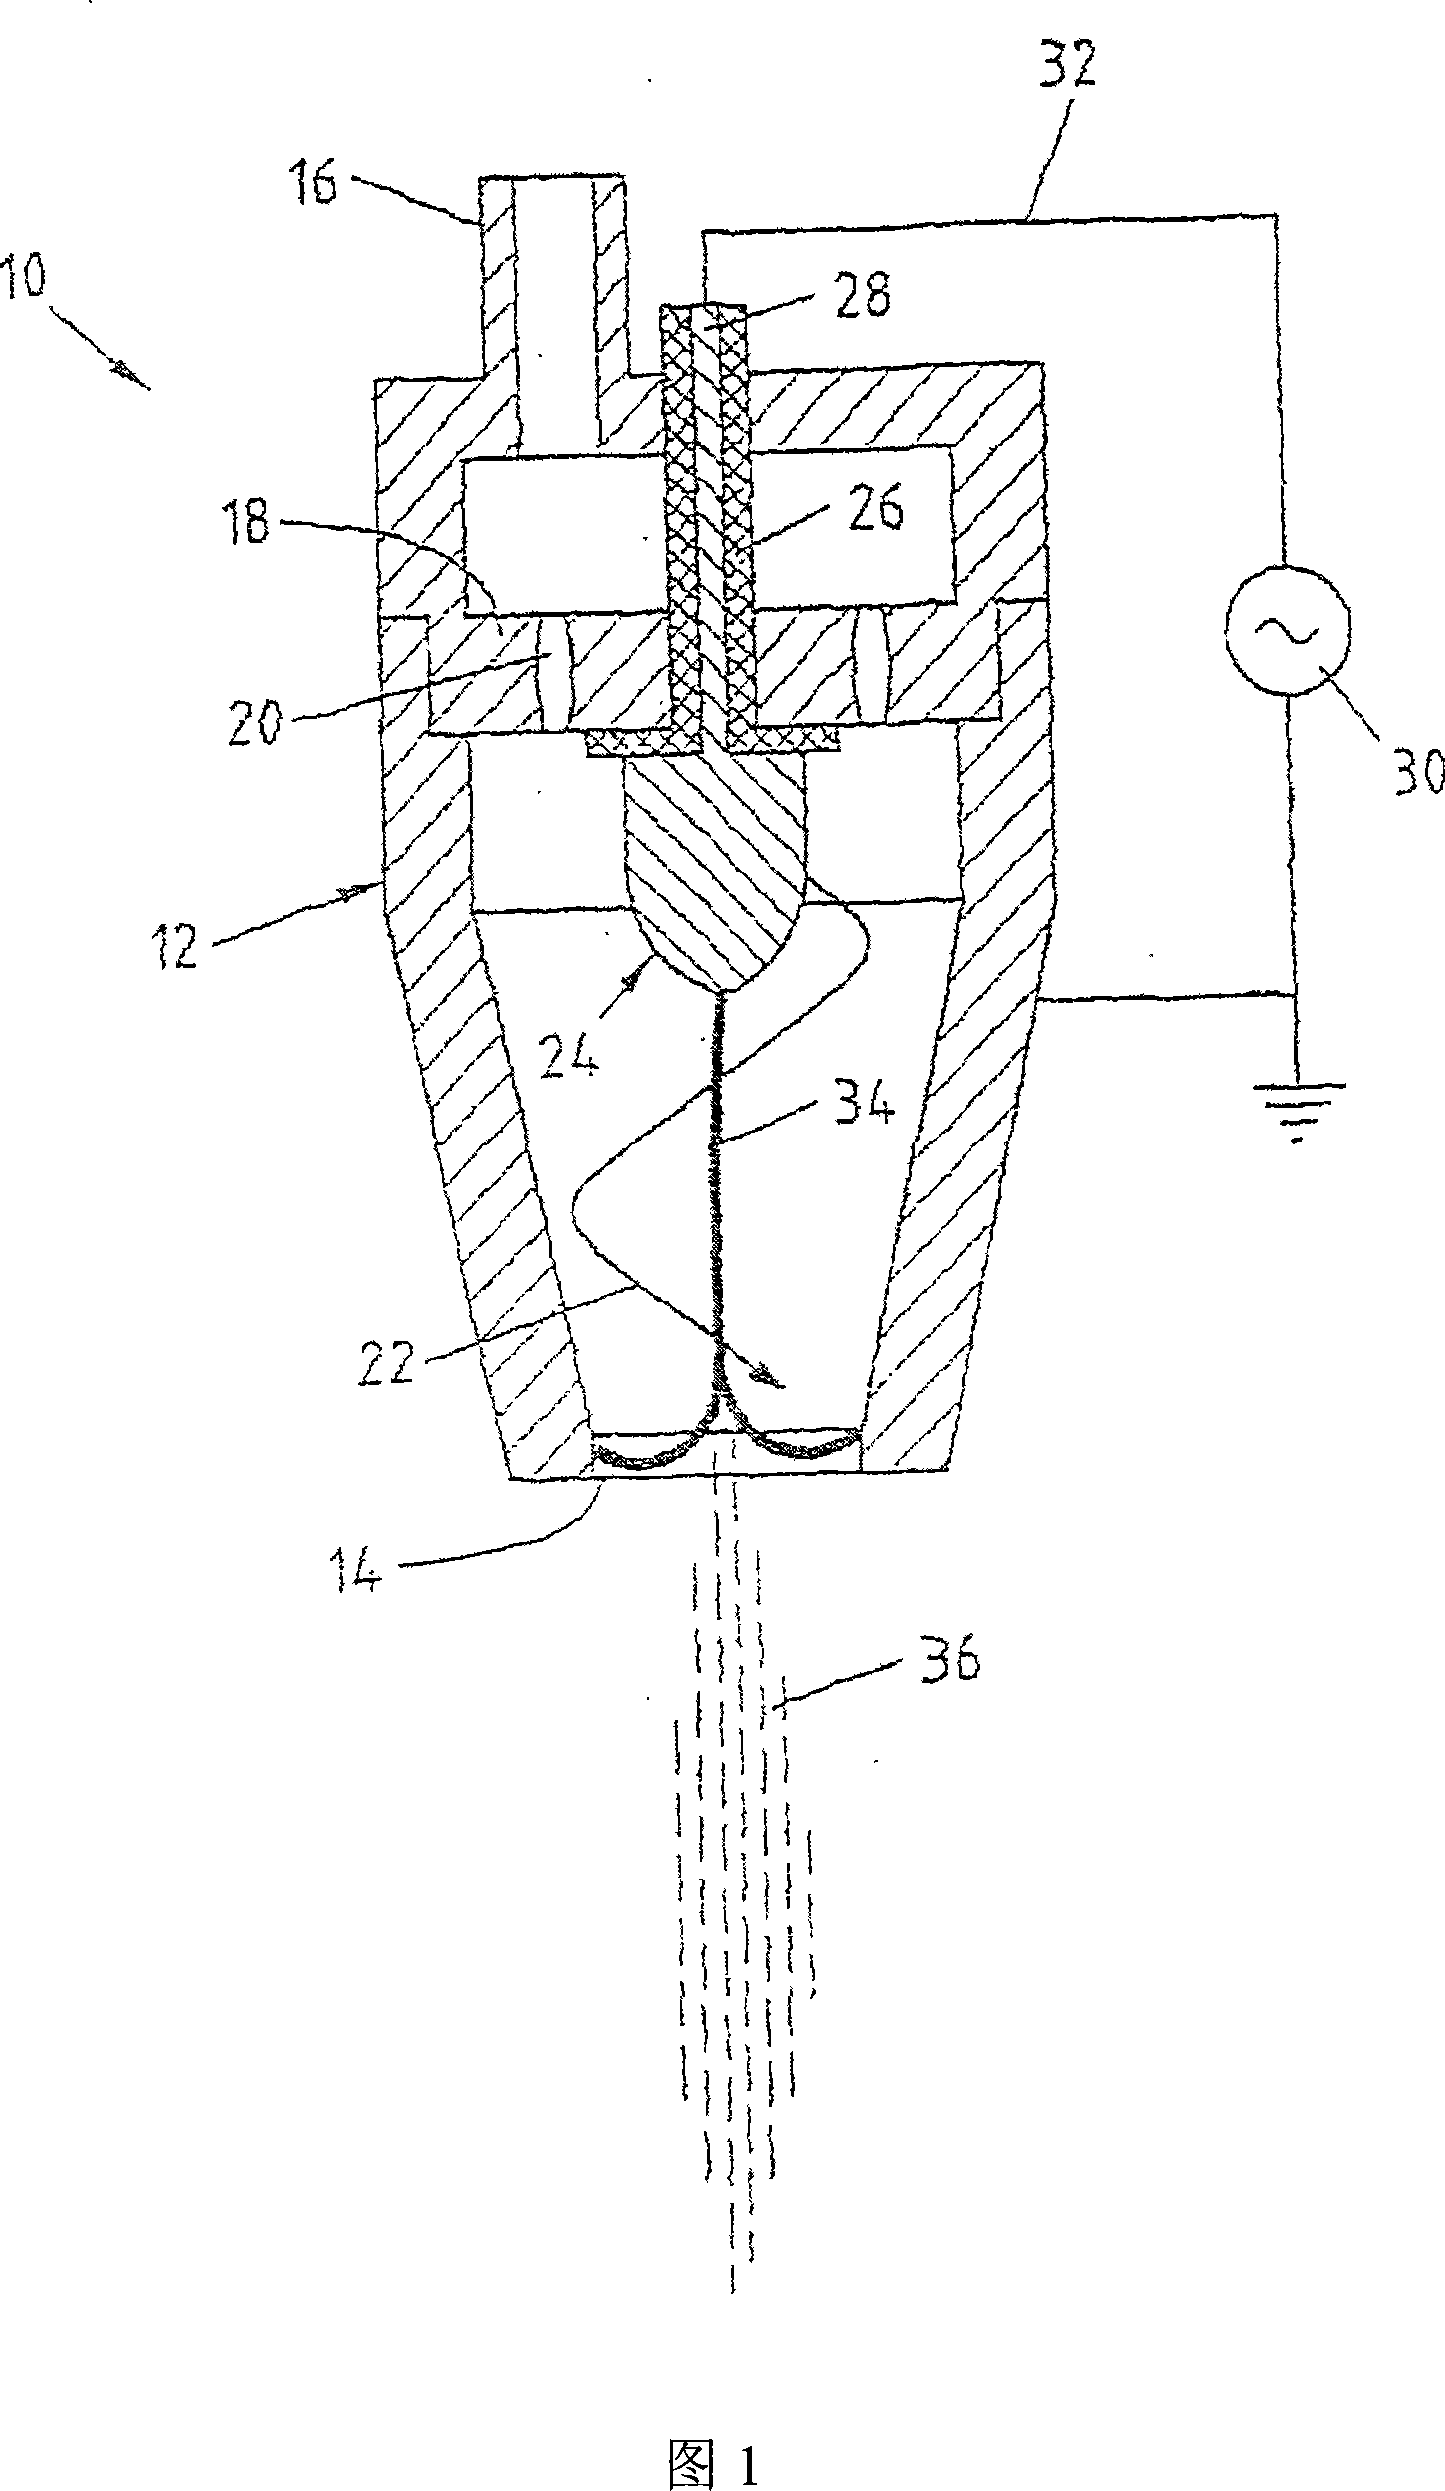 Method for treating and sticking work pieces made of metal or a metal alloy comprising a hydrated oxide and/or hydroxide layer